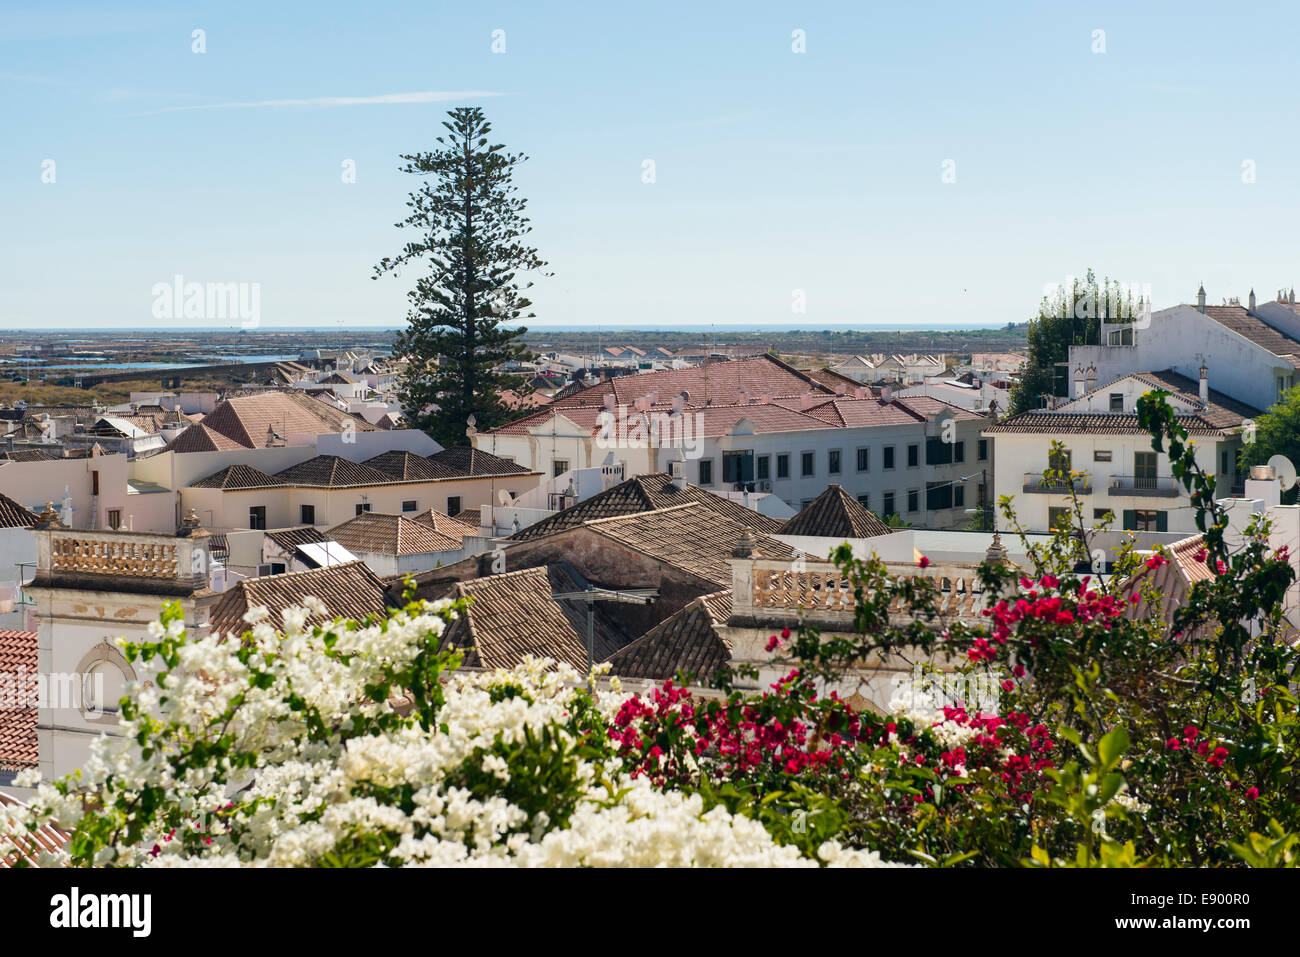 Portugal Algarve Tavira late Bronze Age port rebuilt 18th c century panorama landscape old town houses roofs roof tree trees flowers Stock Photo